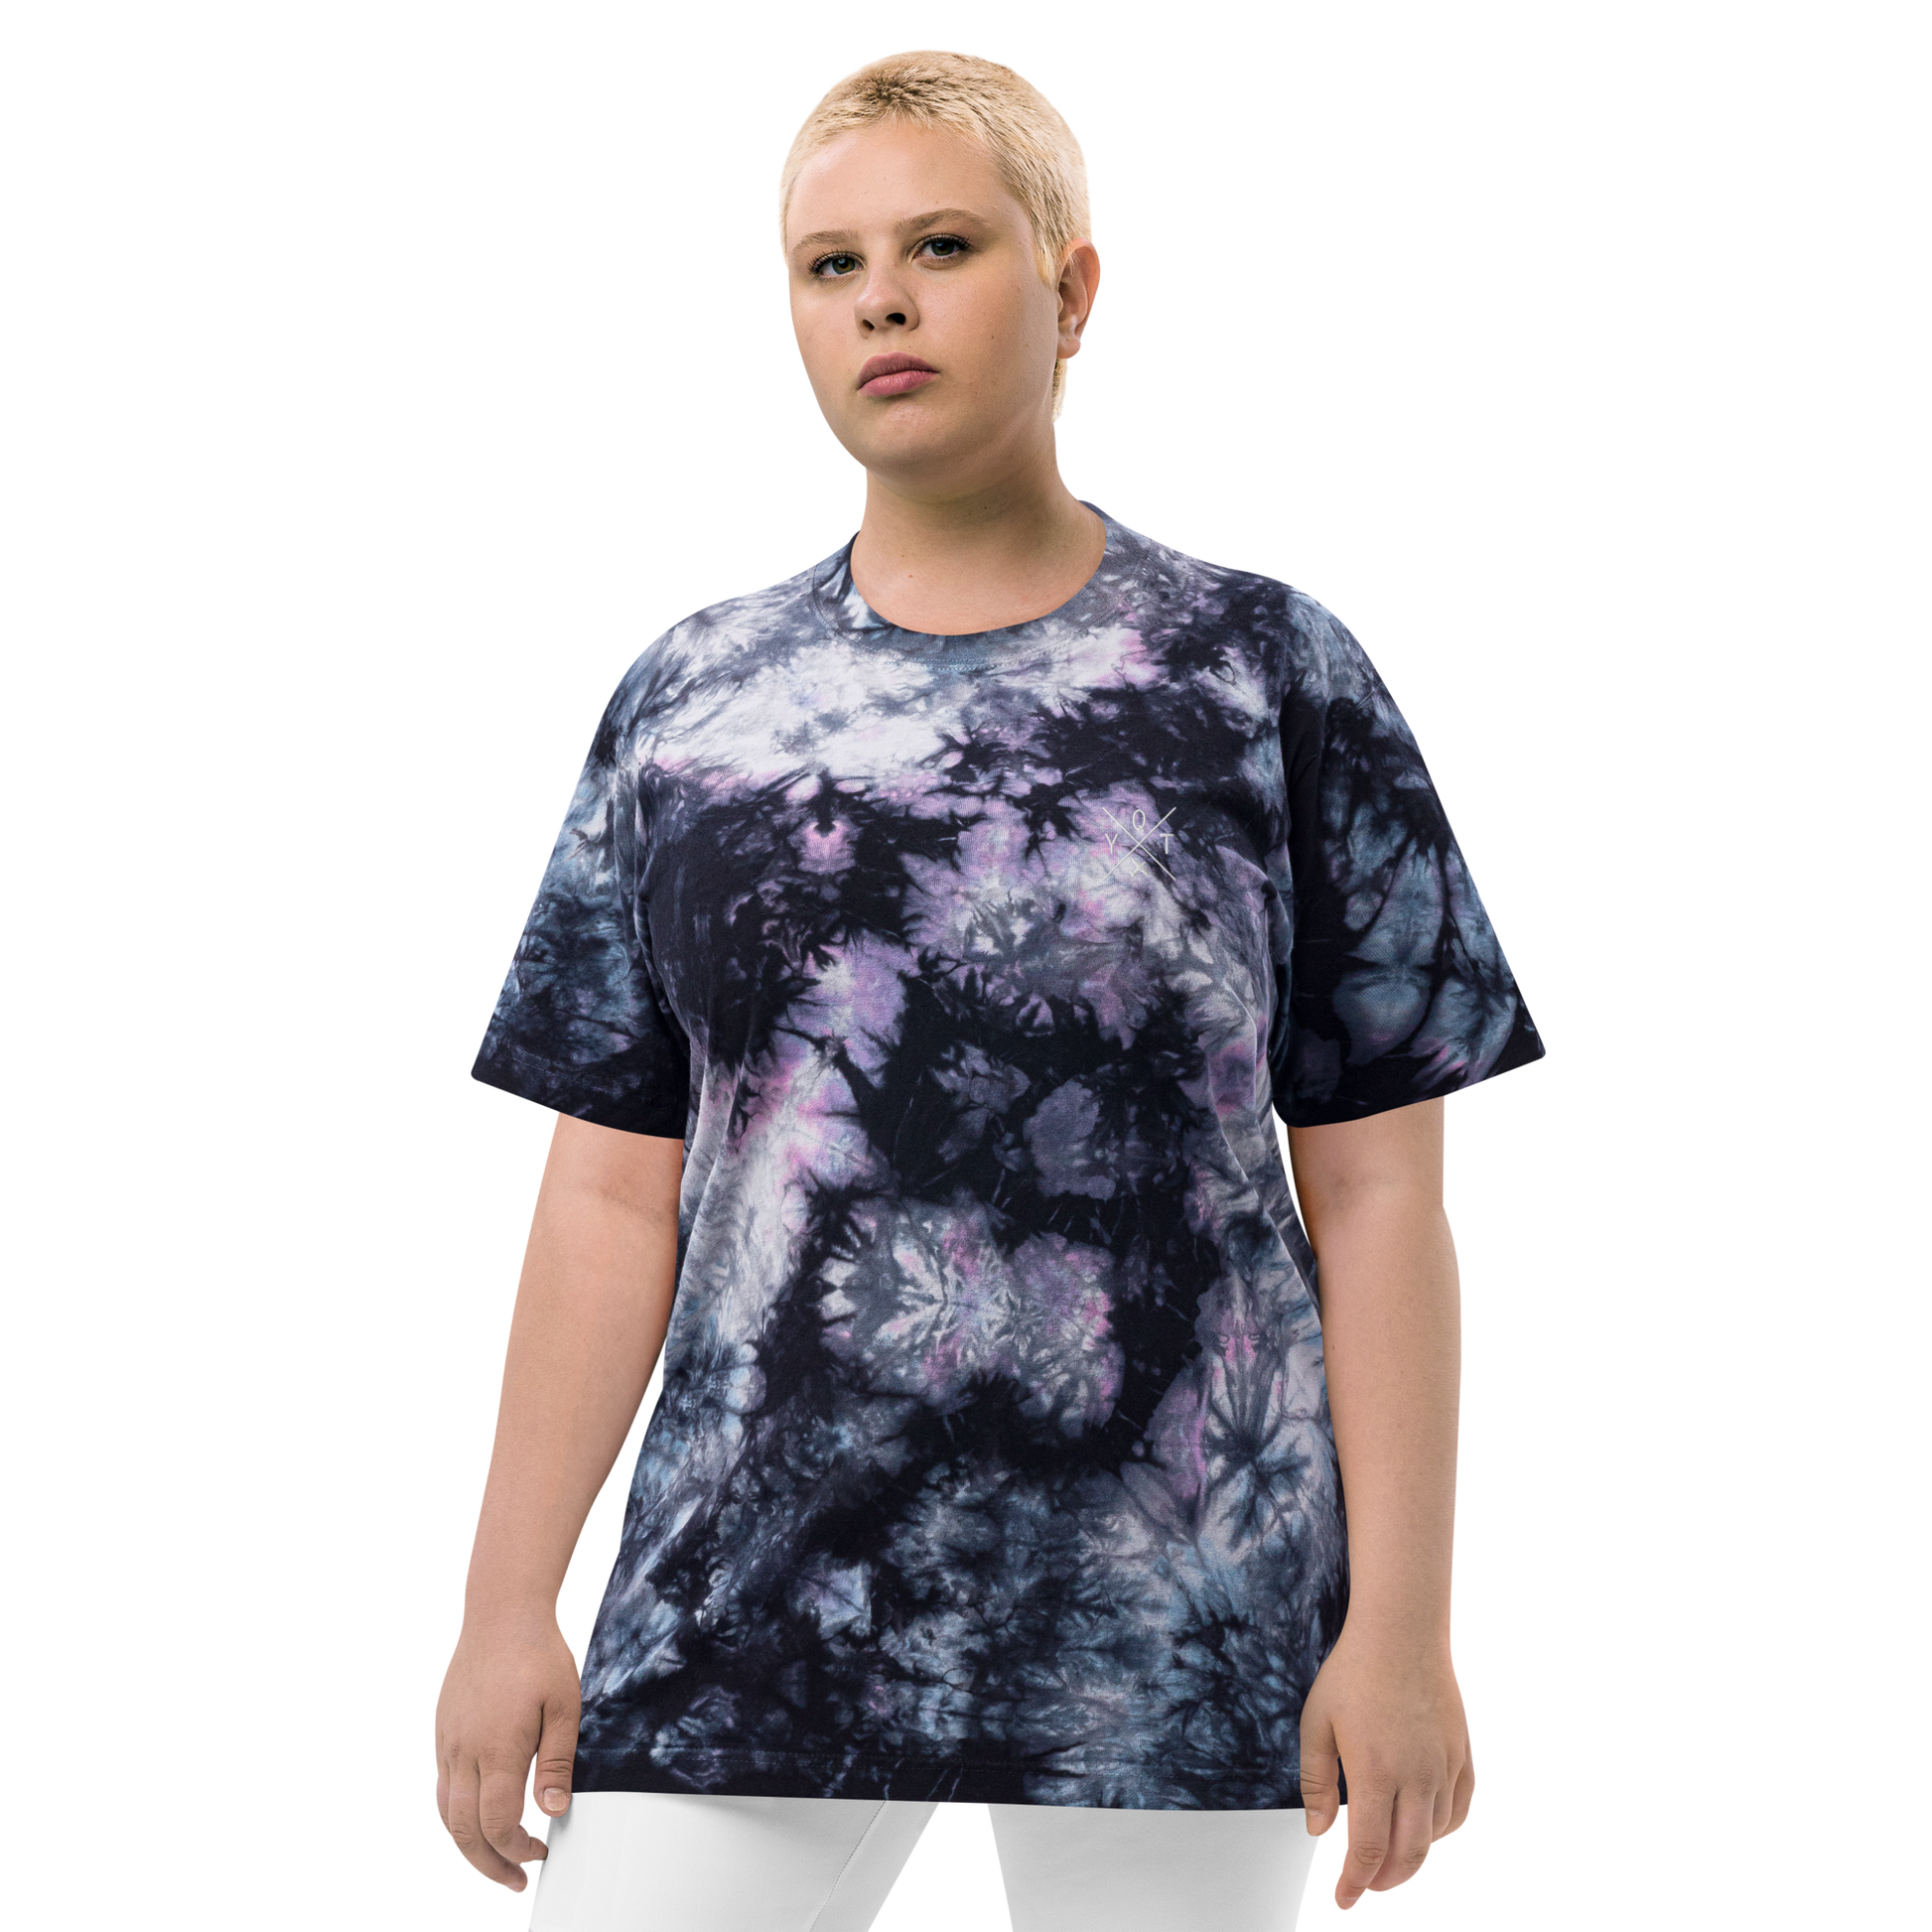 YHM Designs - YQT Thunder Bay Oversized Tie-Dye T-Shirt - Crossed-X Design with Airport Code and Vintage Propliner - White Embroidery - Image 05